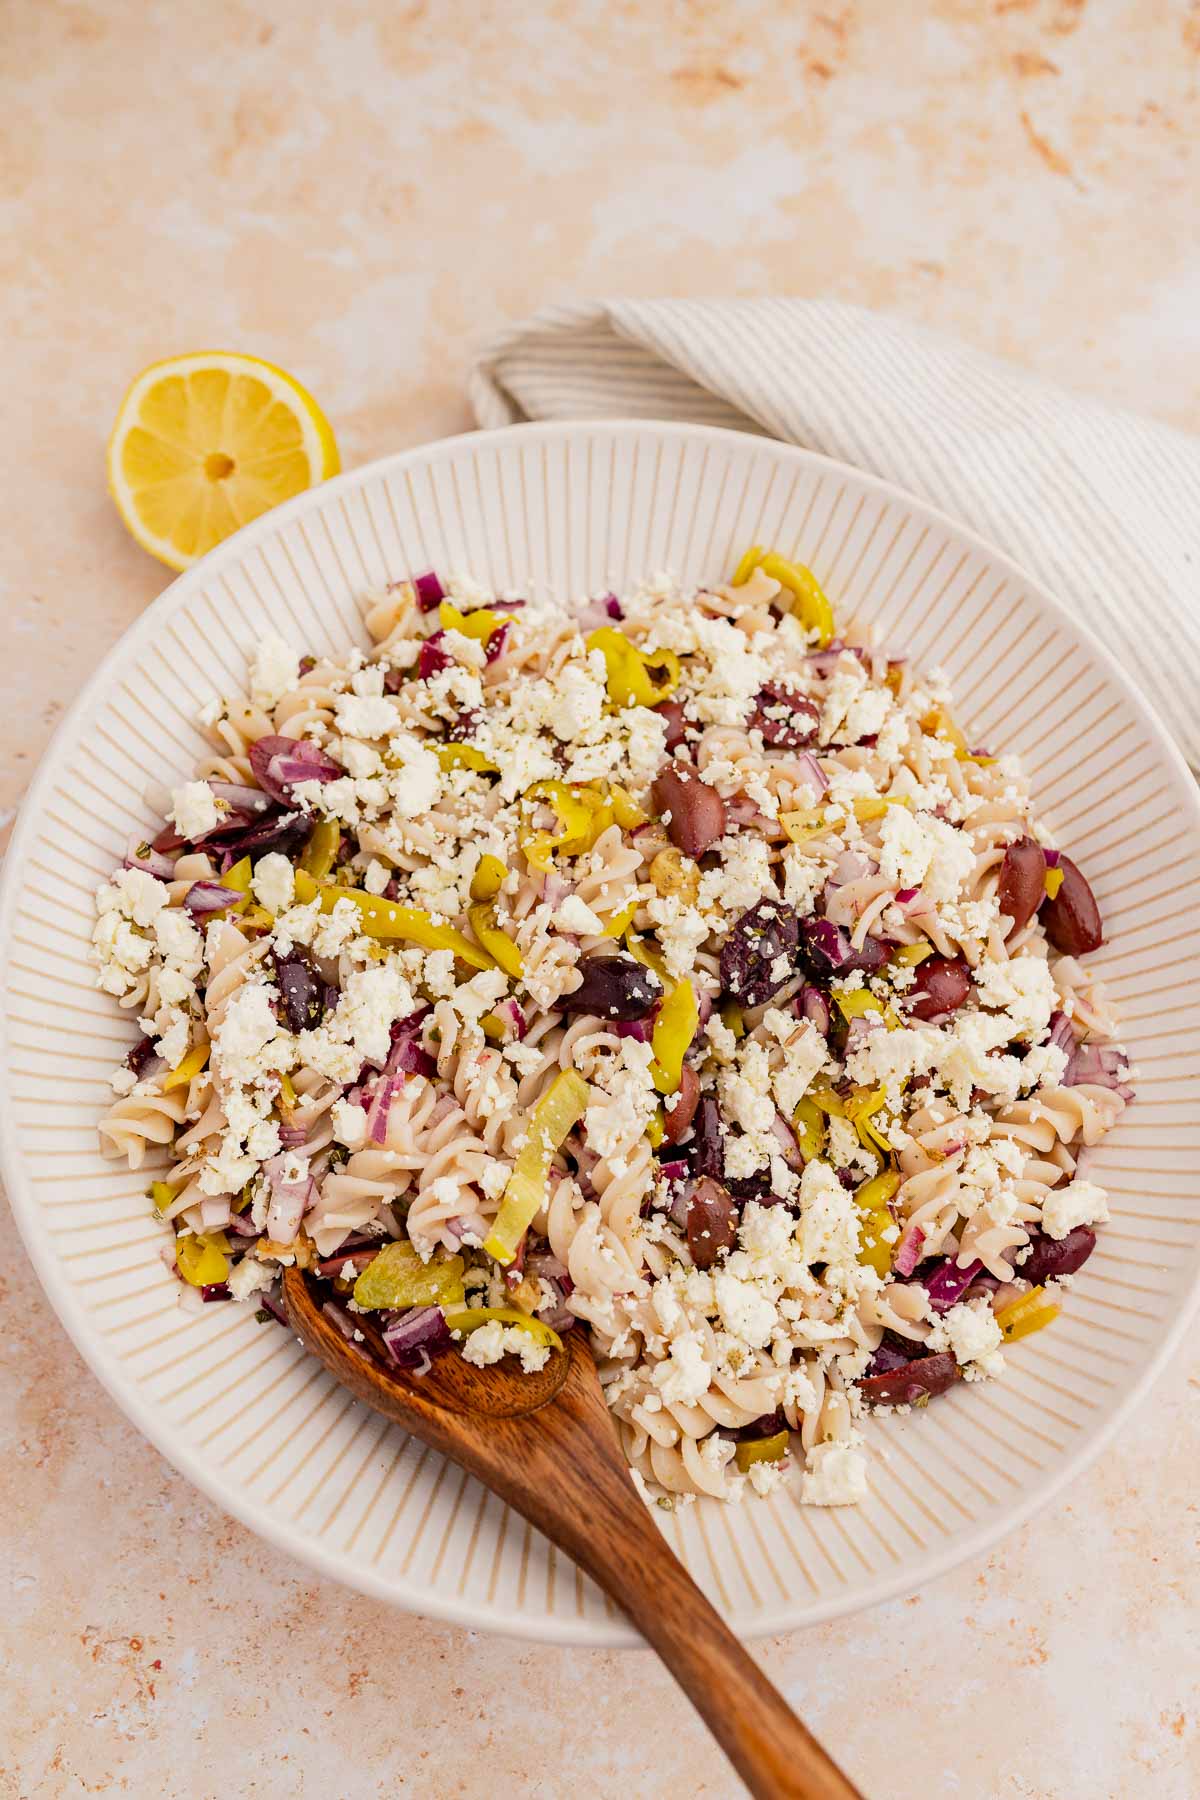 Bowl of Greek orzo pasta salad with feta cheese, olives, and diced vegetables, accompanied by a wooden spoon and a lemon wedge on a marbled countertop.